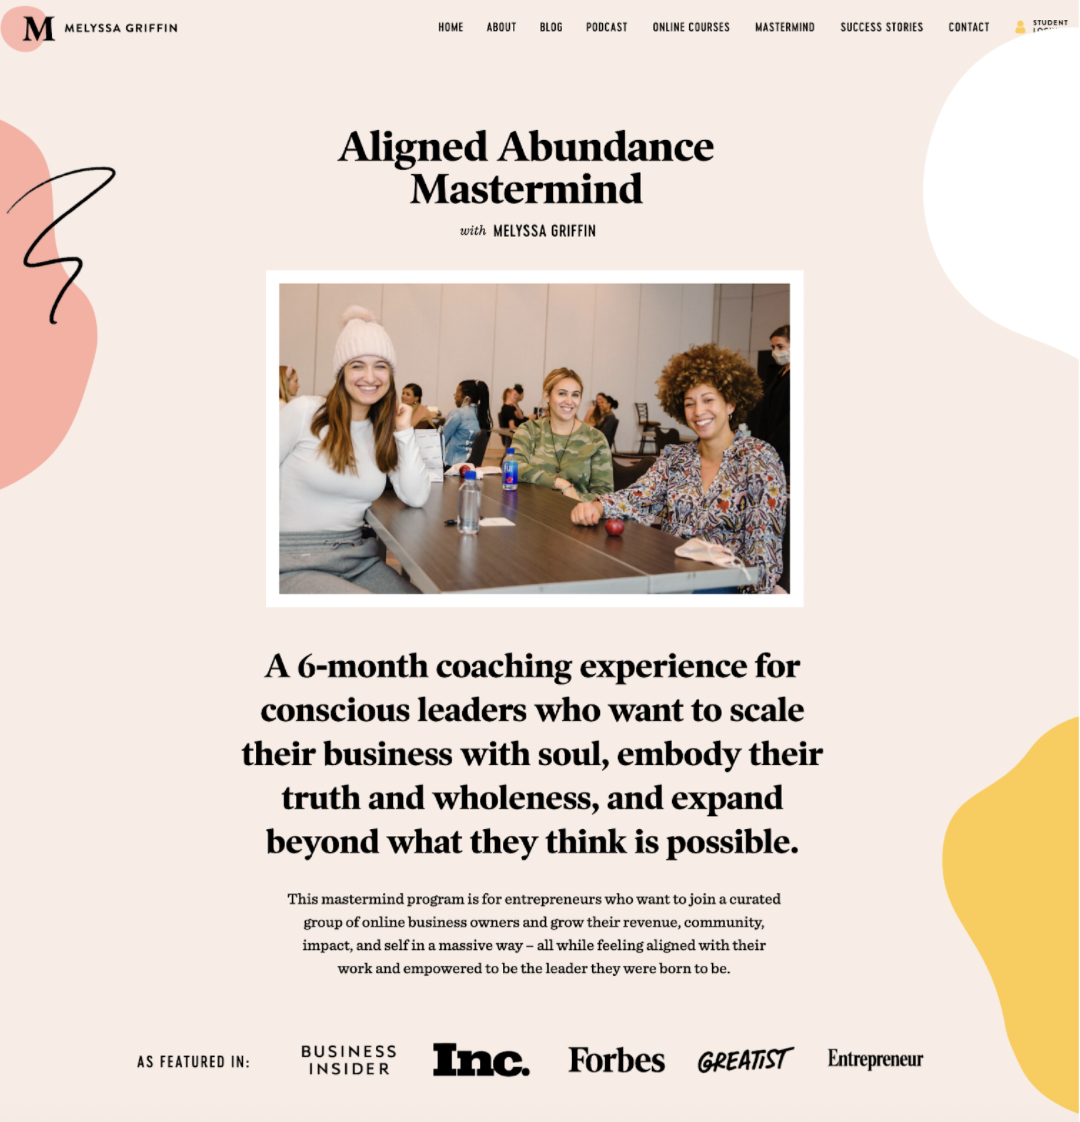 Aligned Abundance Mastermind with an image of a group of women sitting at a desk and smiling